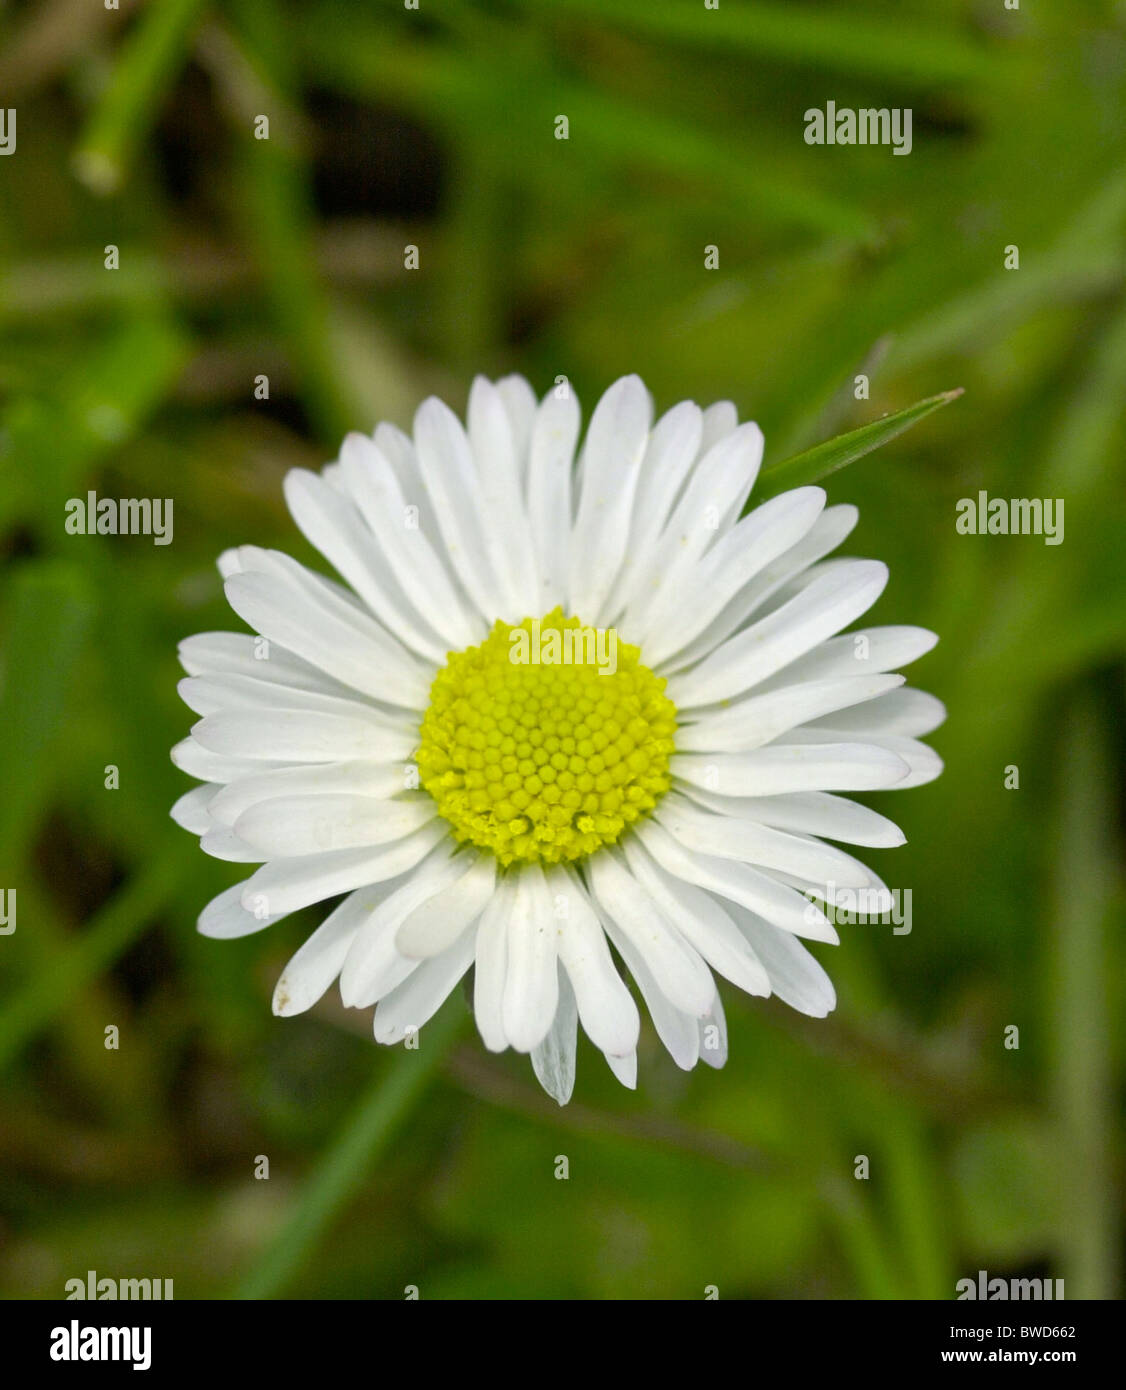 Daisy (Bellis perennis) hated by lawn fanatics - loved by children Stock Photo